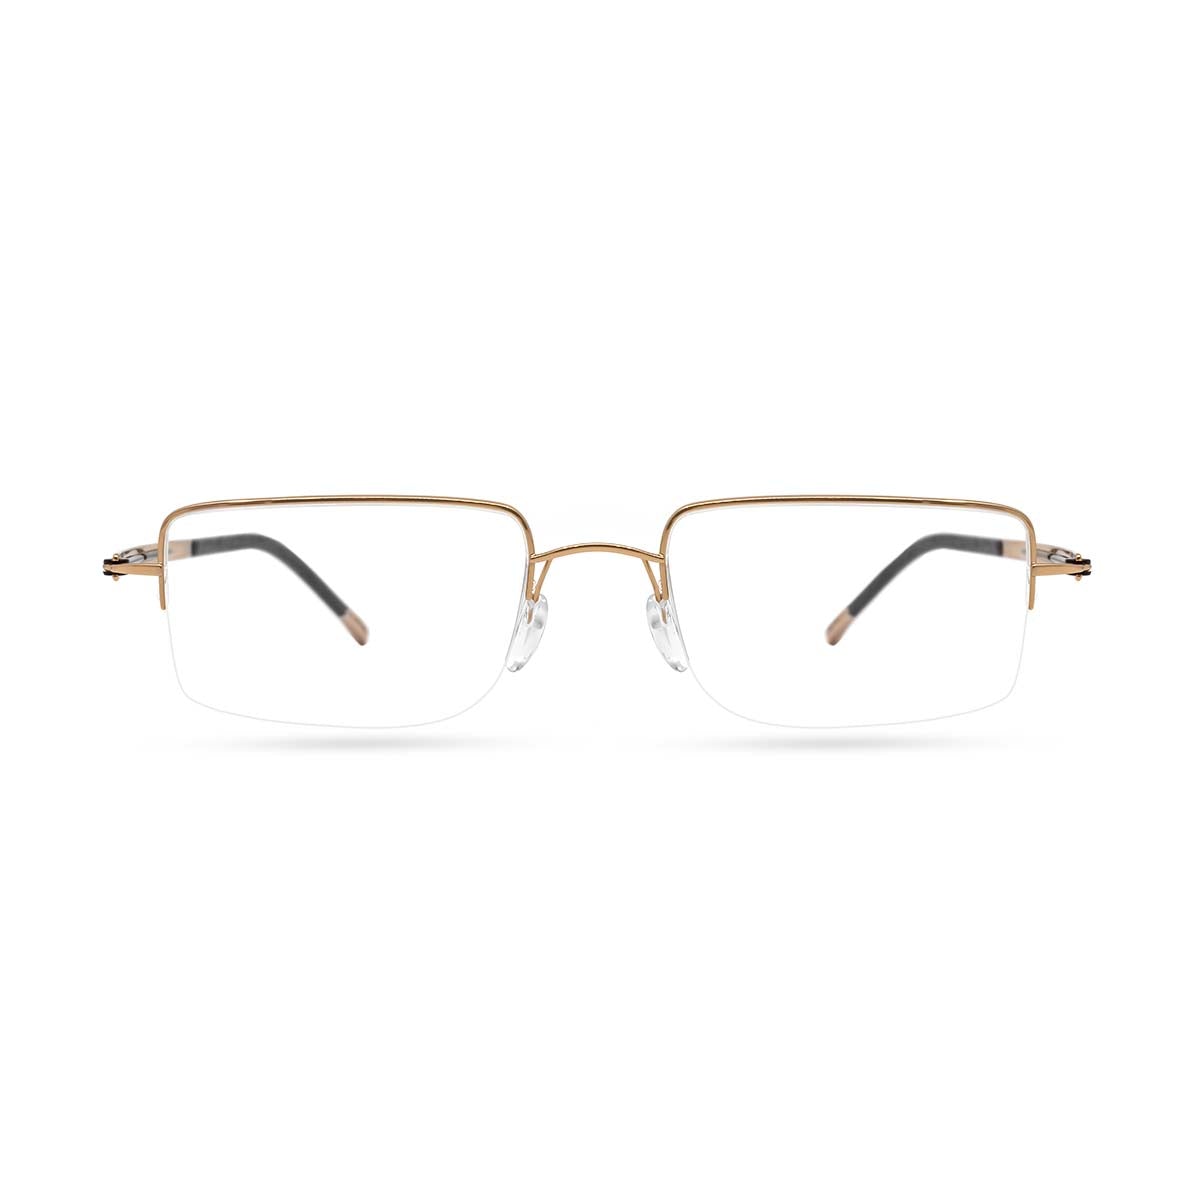 SILHOUETTE 5440 20 6051 spectacle-frame